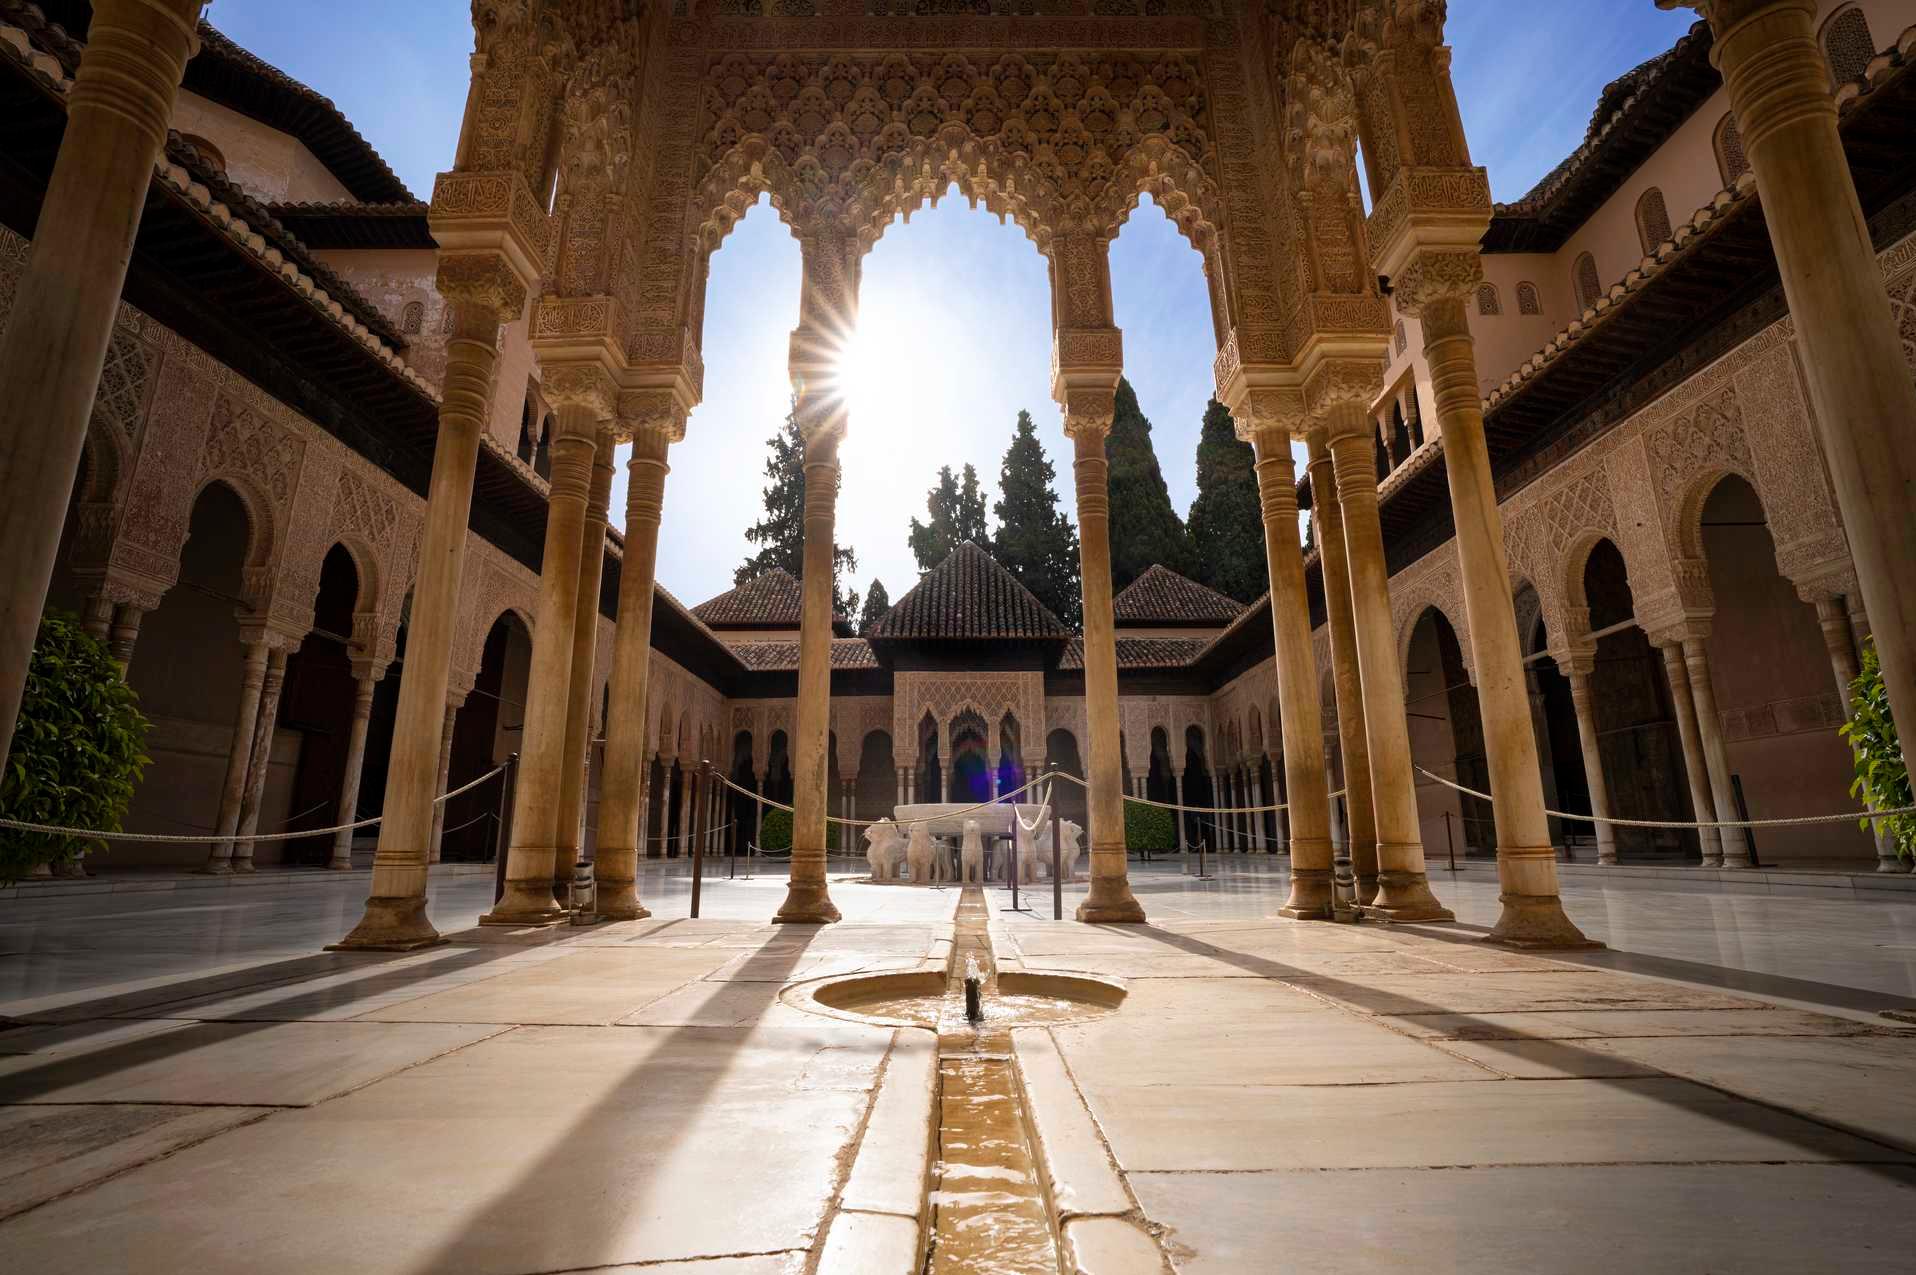 Turespaña, in collaboration with Turismo Andaluz, presents a halal tourism guide to Andalusia